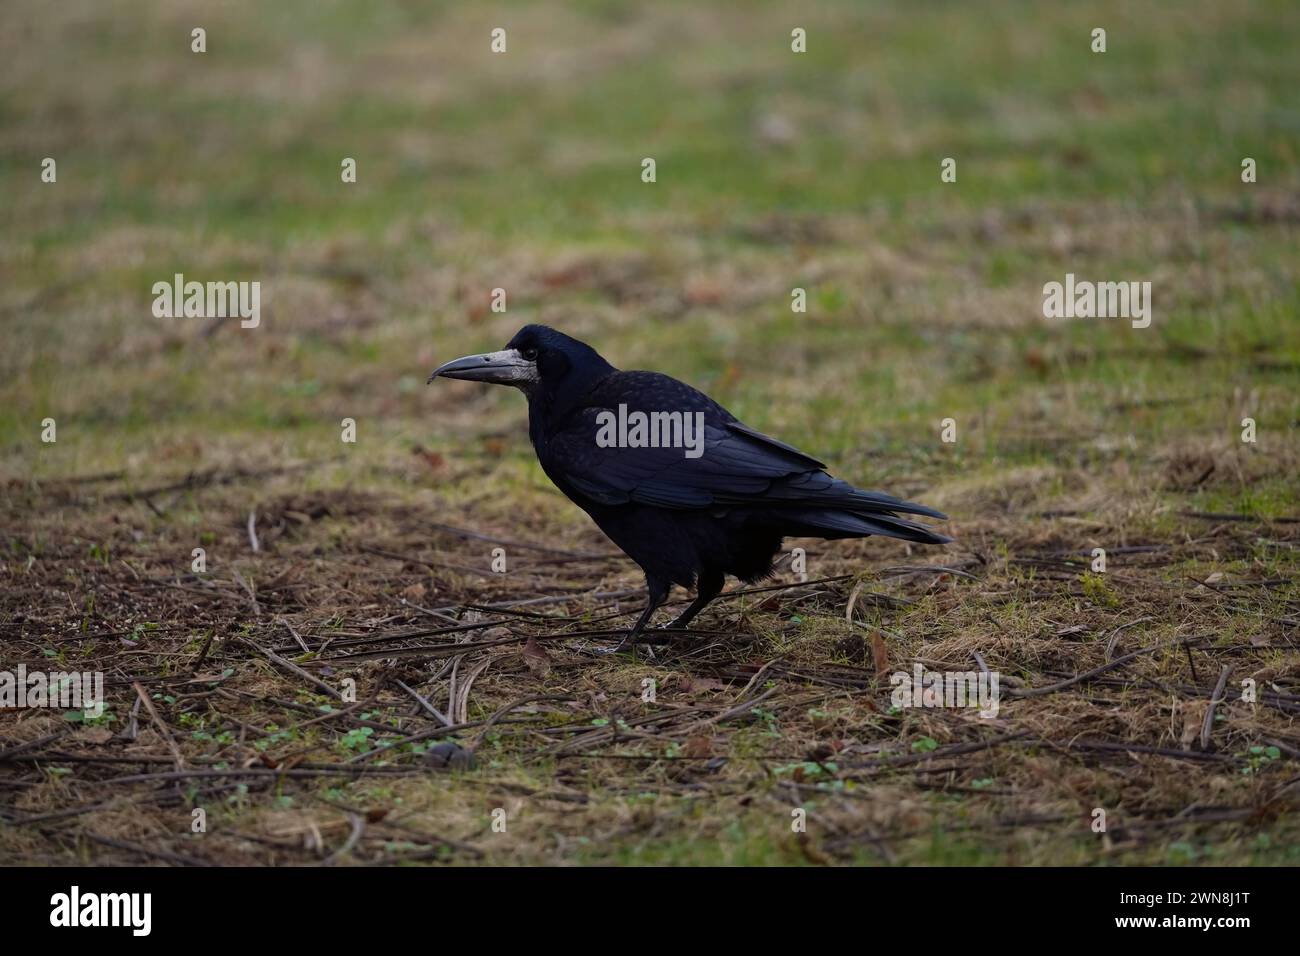 One sunny morning, a black raven was walking on the ground looking for something to catch and eat. Stock Photo